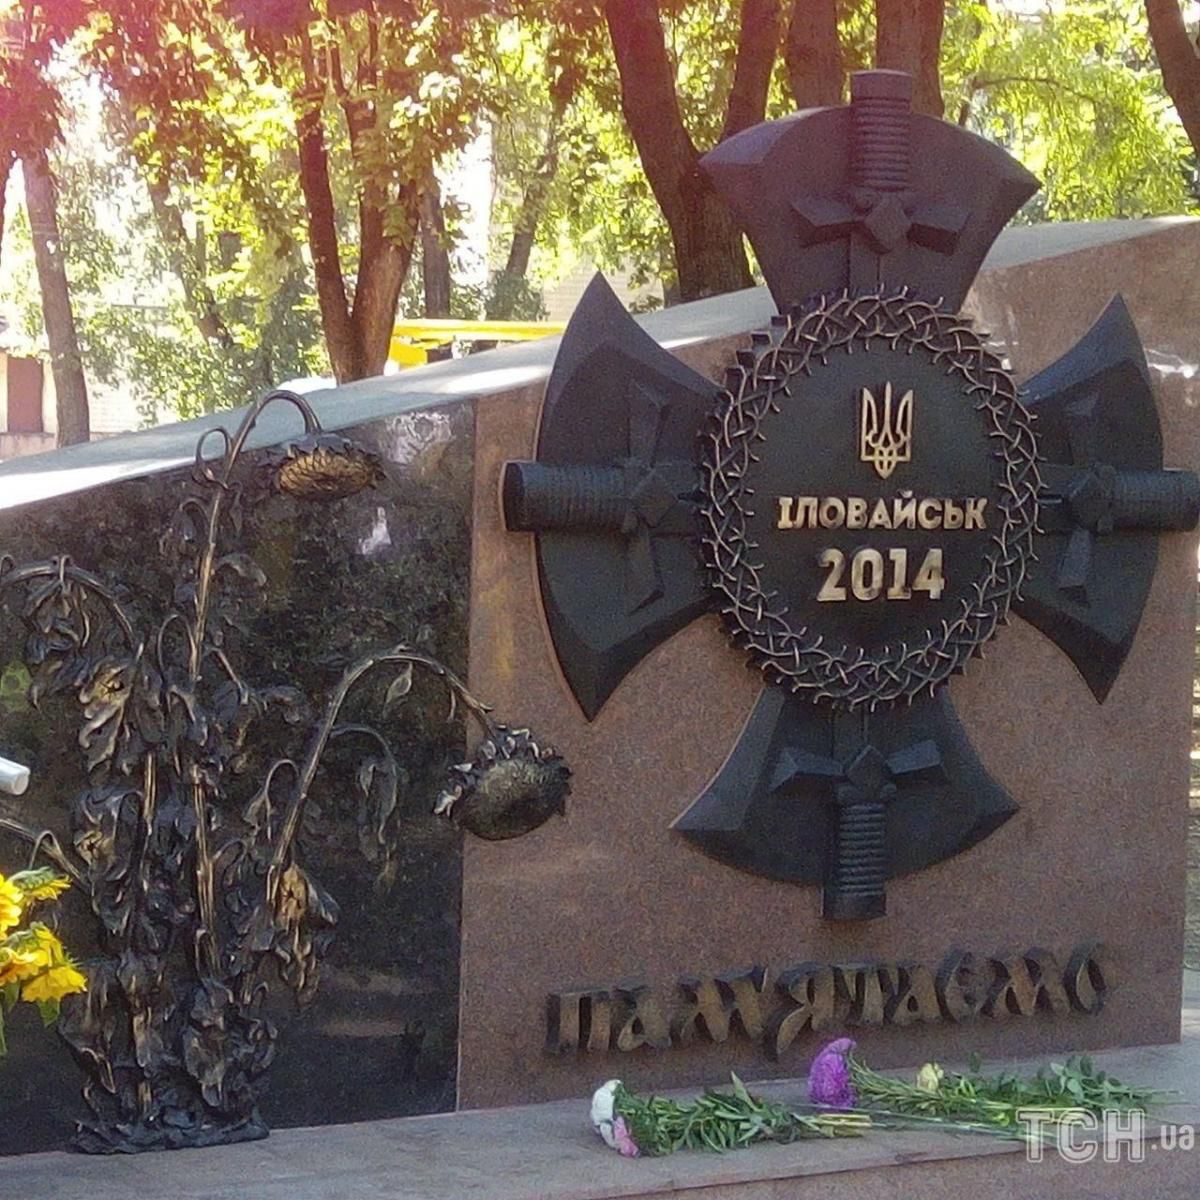 The Ilovaisk tragedy. Ukraine paid homage to the fallen heroes